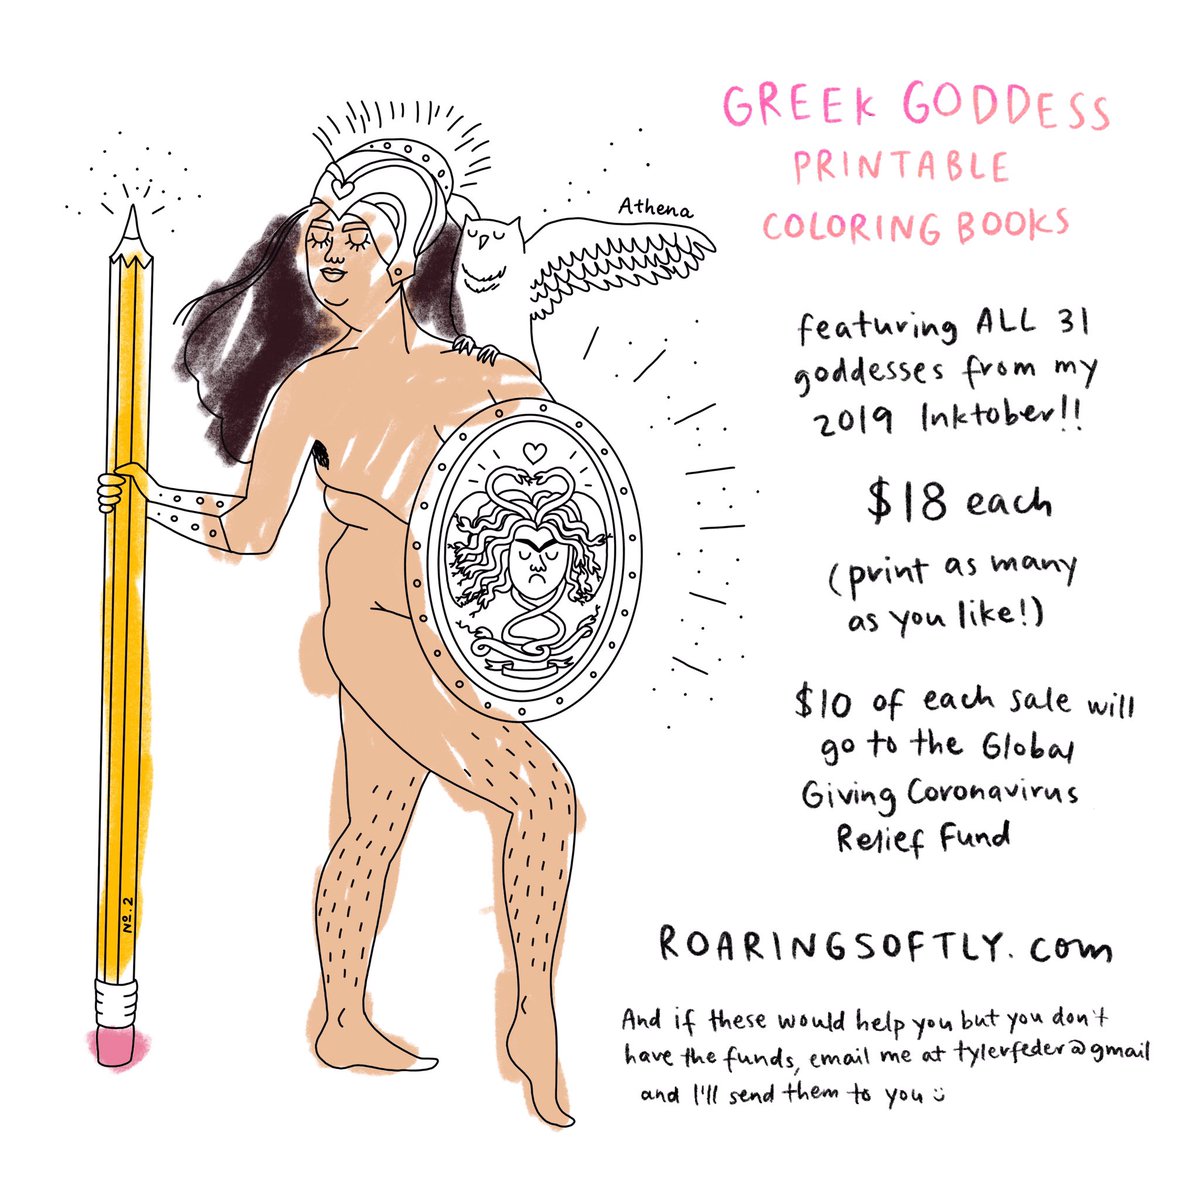 If you like coloring and/or Greek mythology and/or a ton of non-sexual nudity, I just added a Greek goddess printable coloring book to my Etsy shop ? 

https://t.co/PUd3wvO5nH 